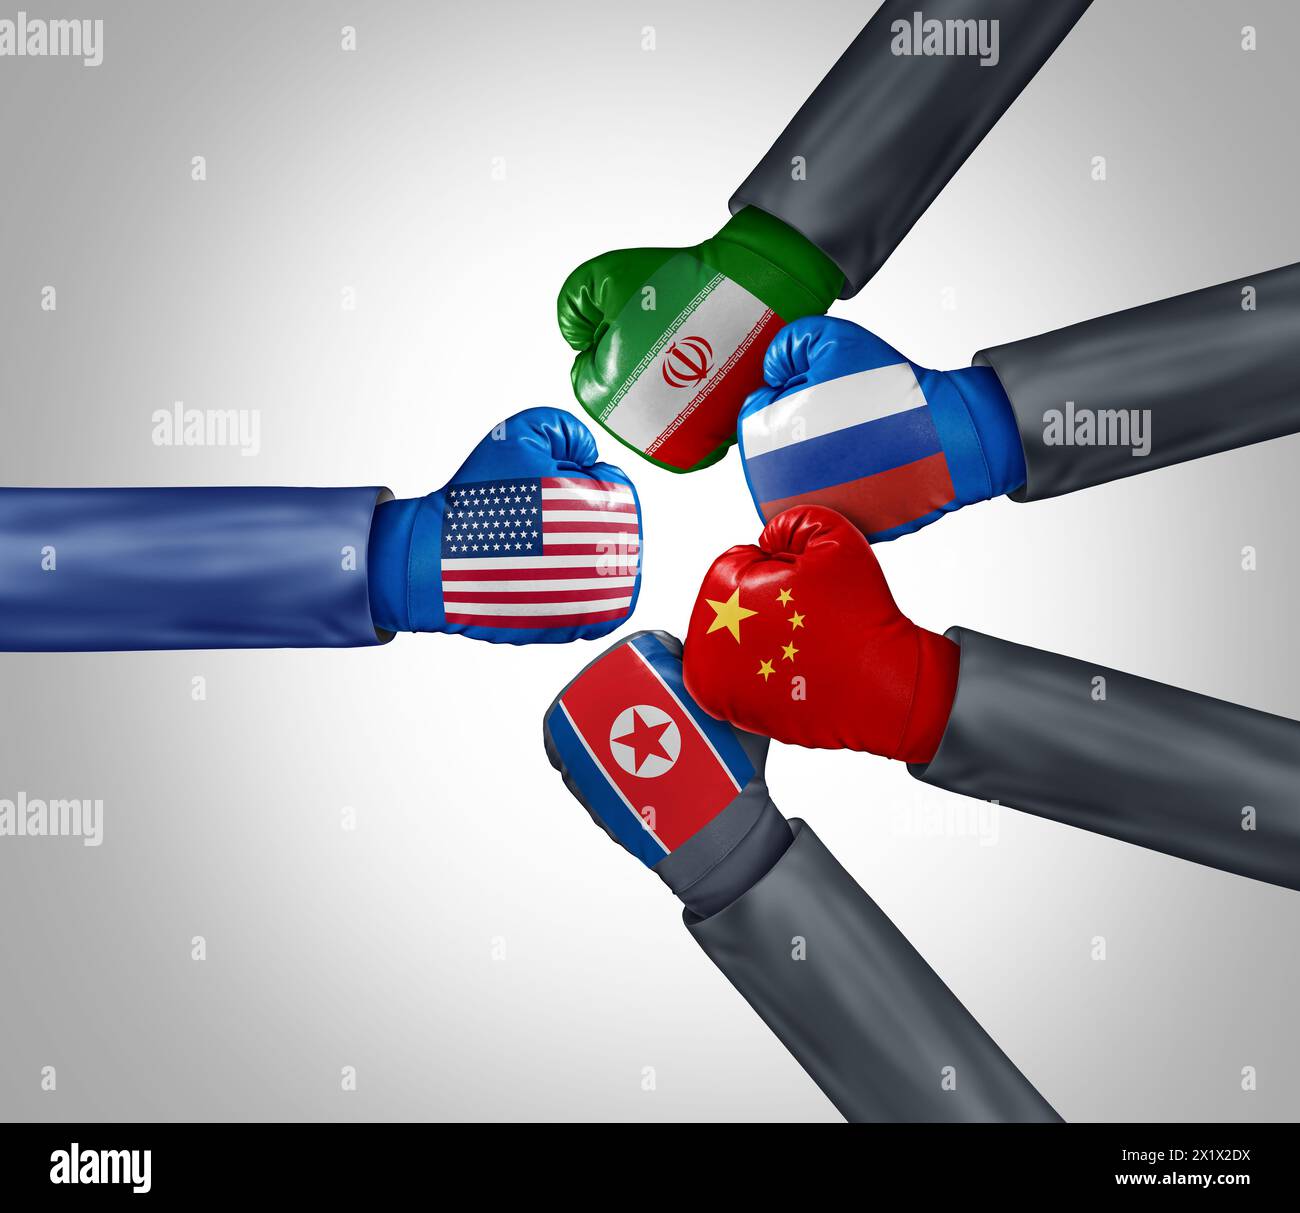 USA Versus Russia China North Korea And Iran as a strategic economic and political partnership and foreign policy alliance to compete with American go Stock Photo